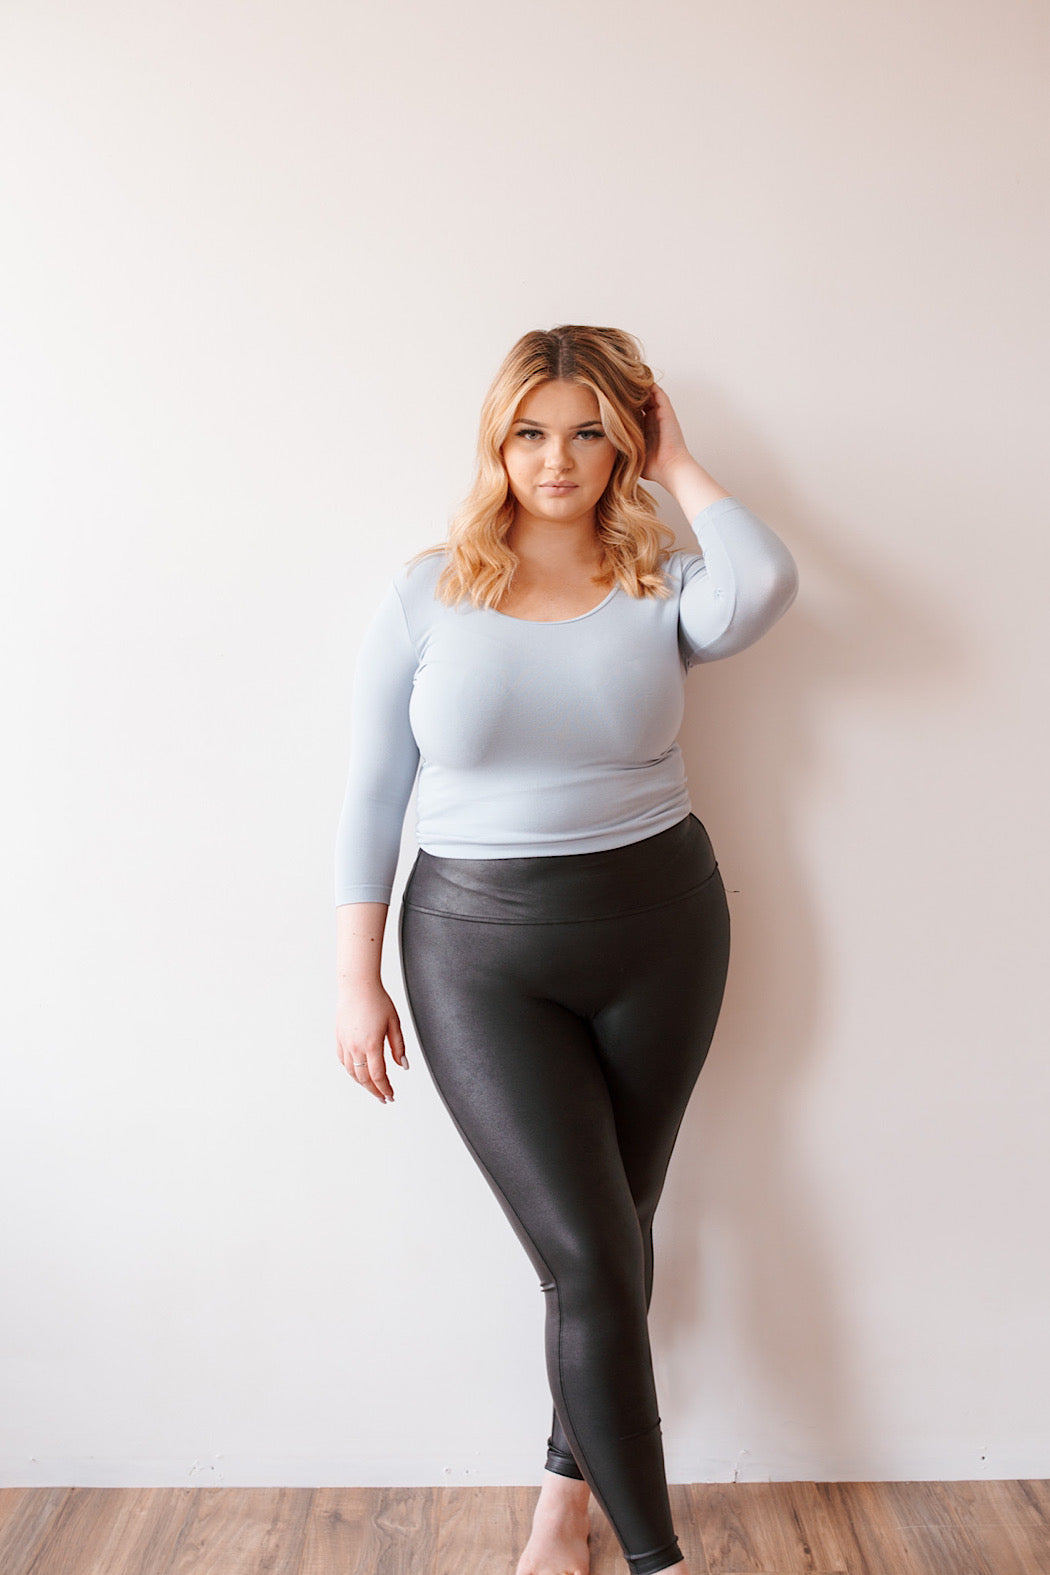 The Bay - Complete your holiday look with shapewear from Spanx